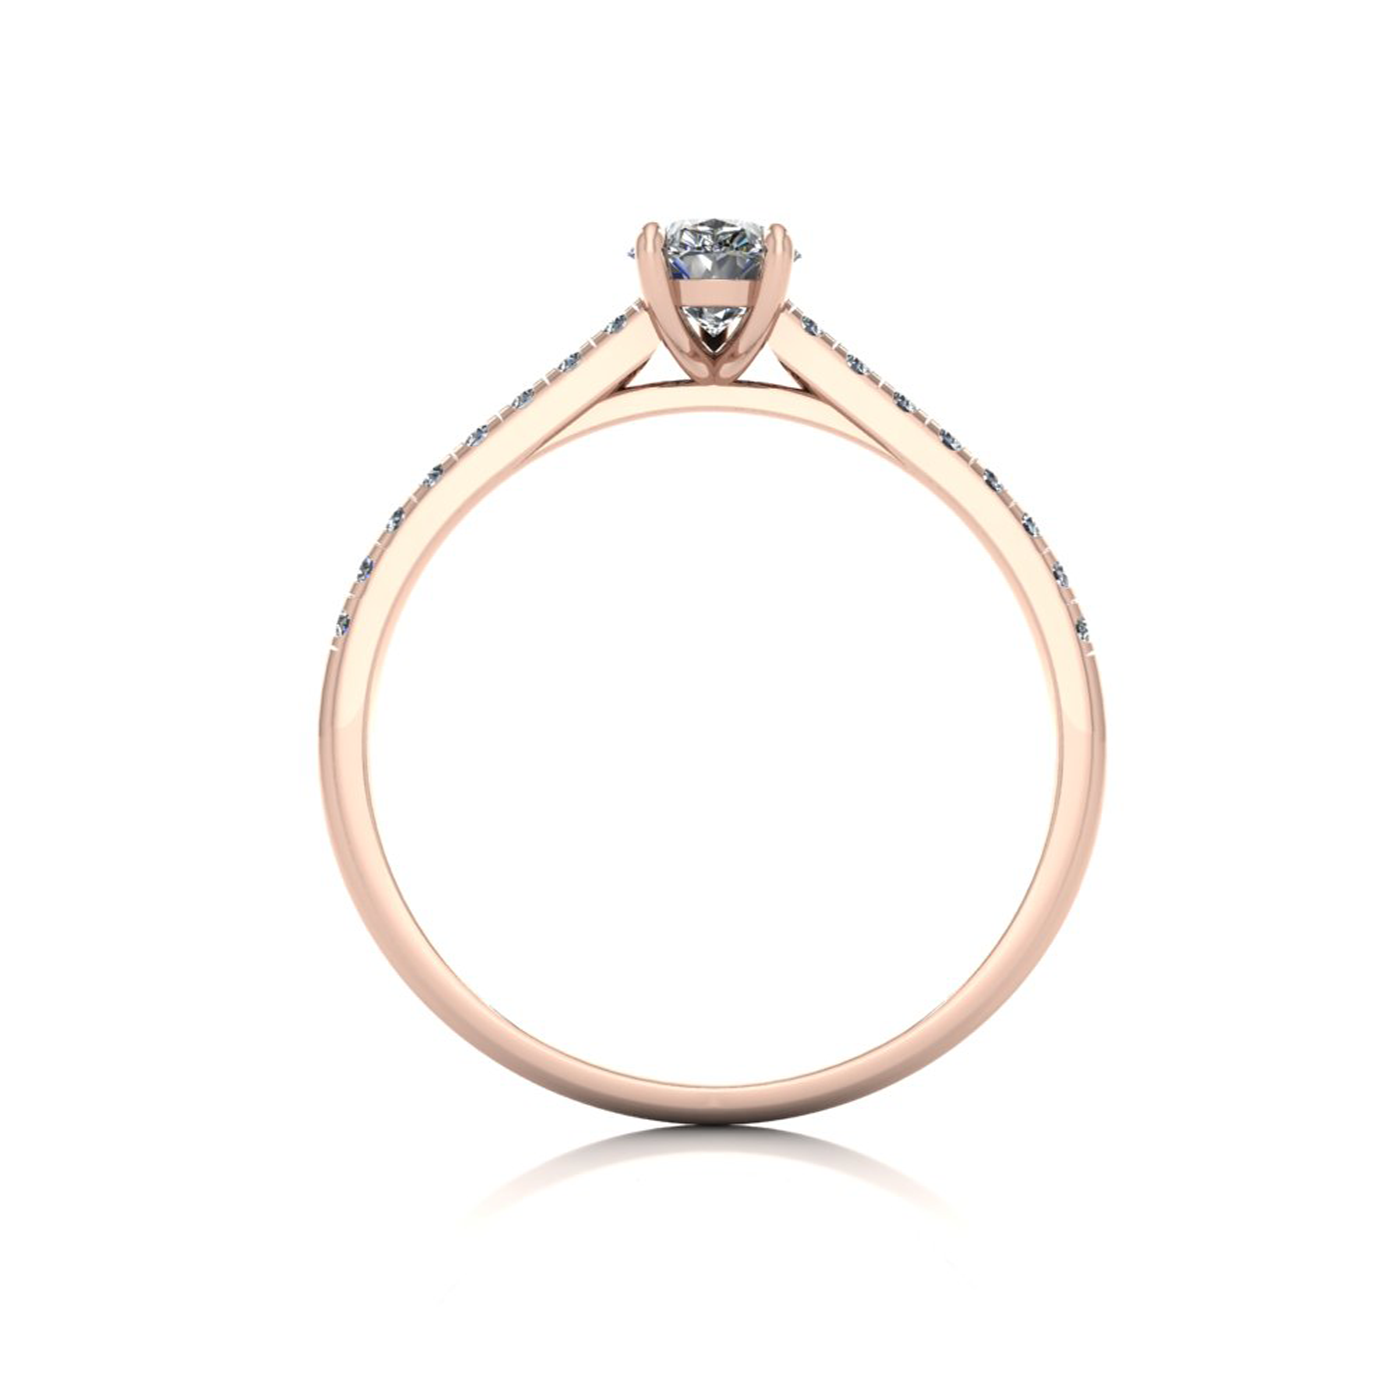 18k rose gold 3 prongs pear shape diamond ring with side stones